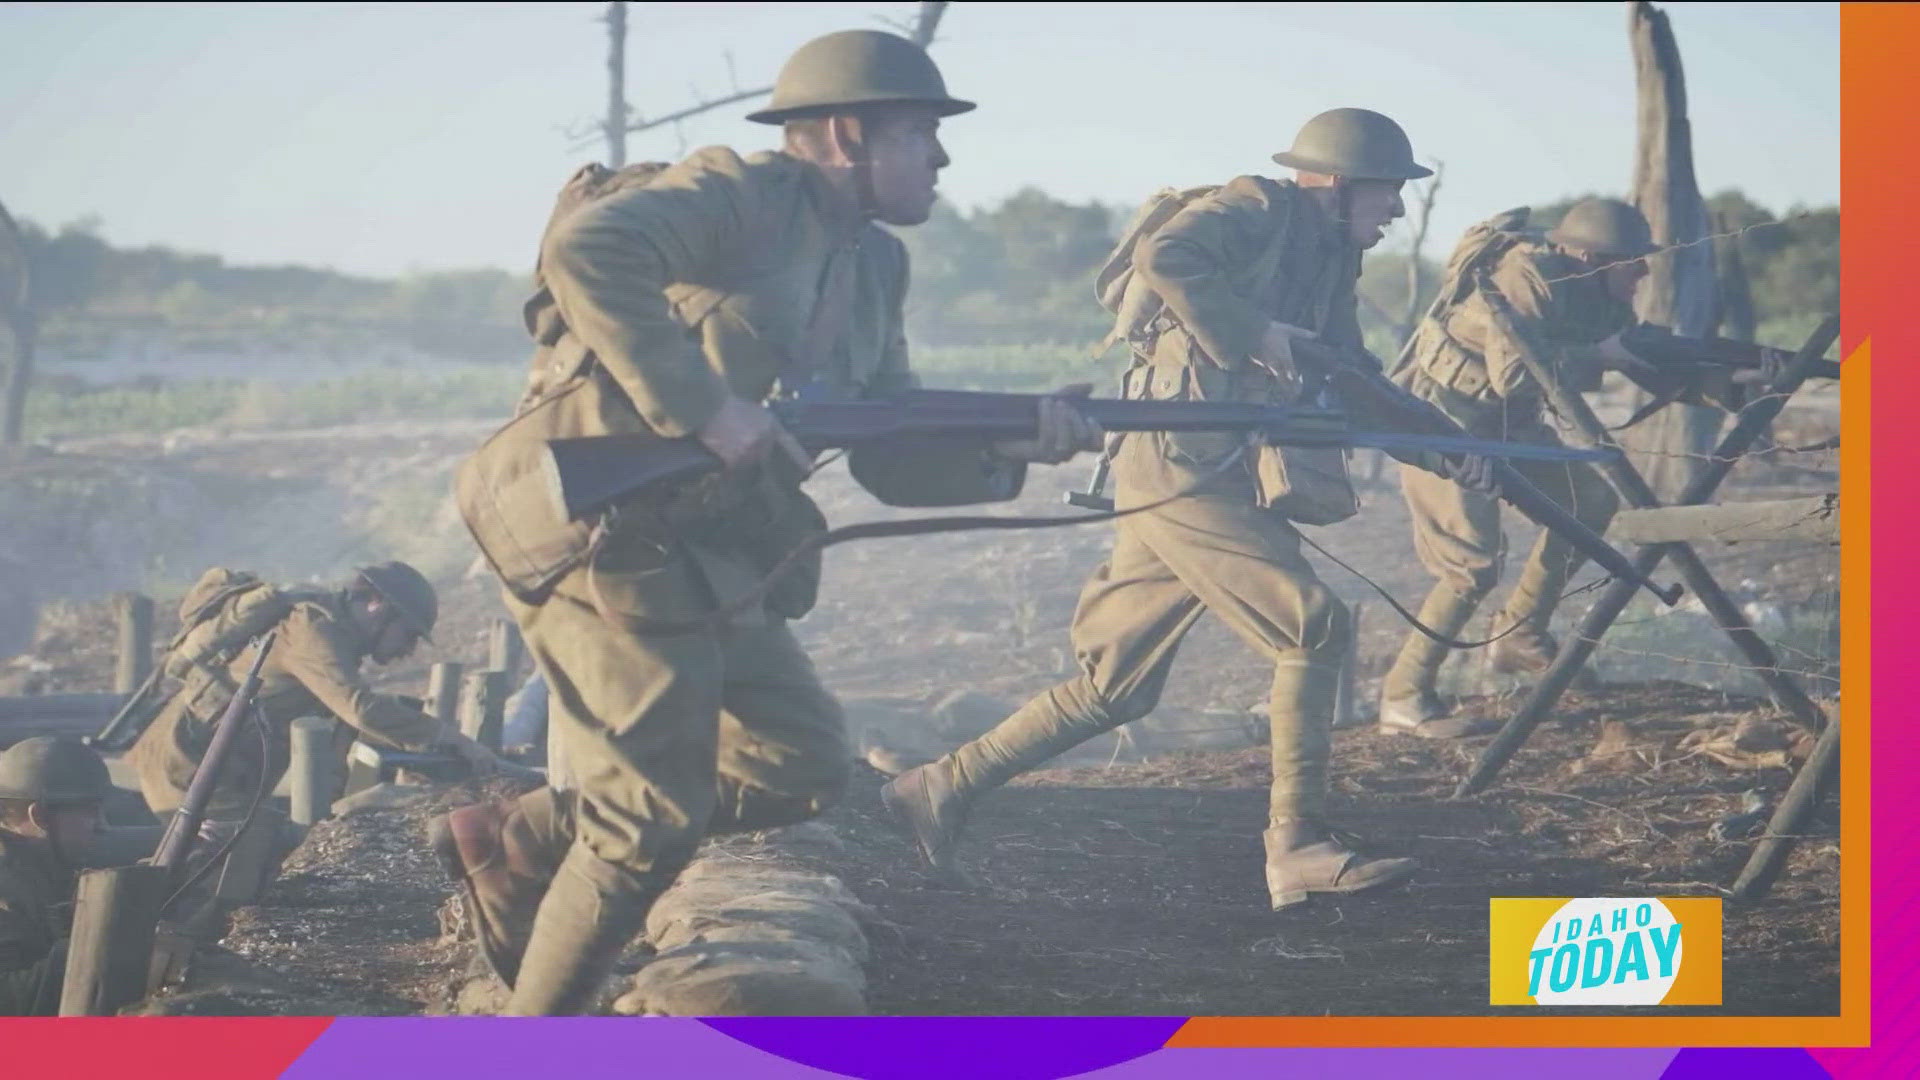 Interview with Director Mandla Dube and his new film, The Great War, premiering on Memorial Day on HISTORY